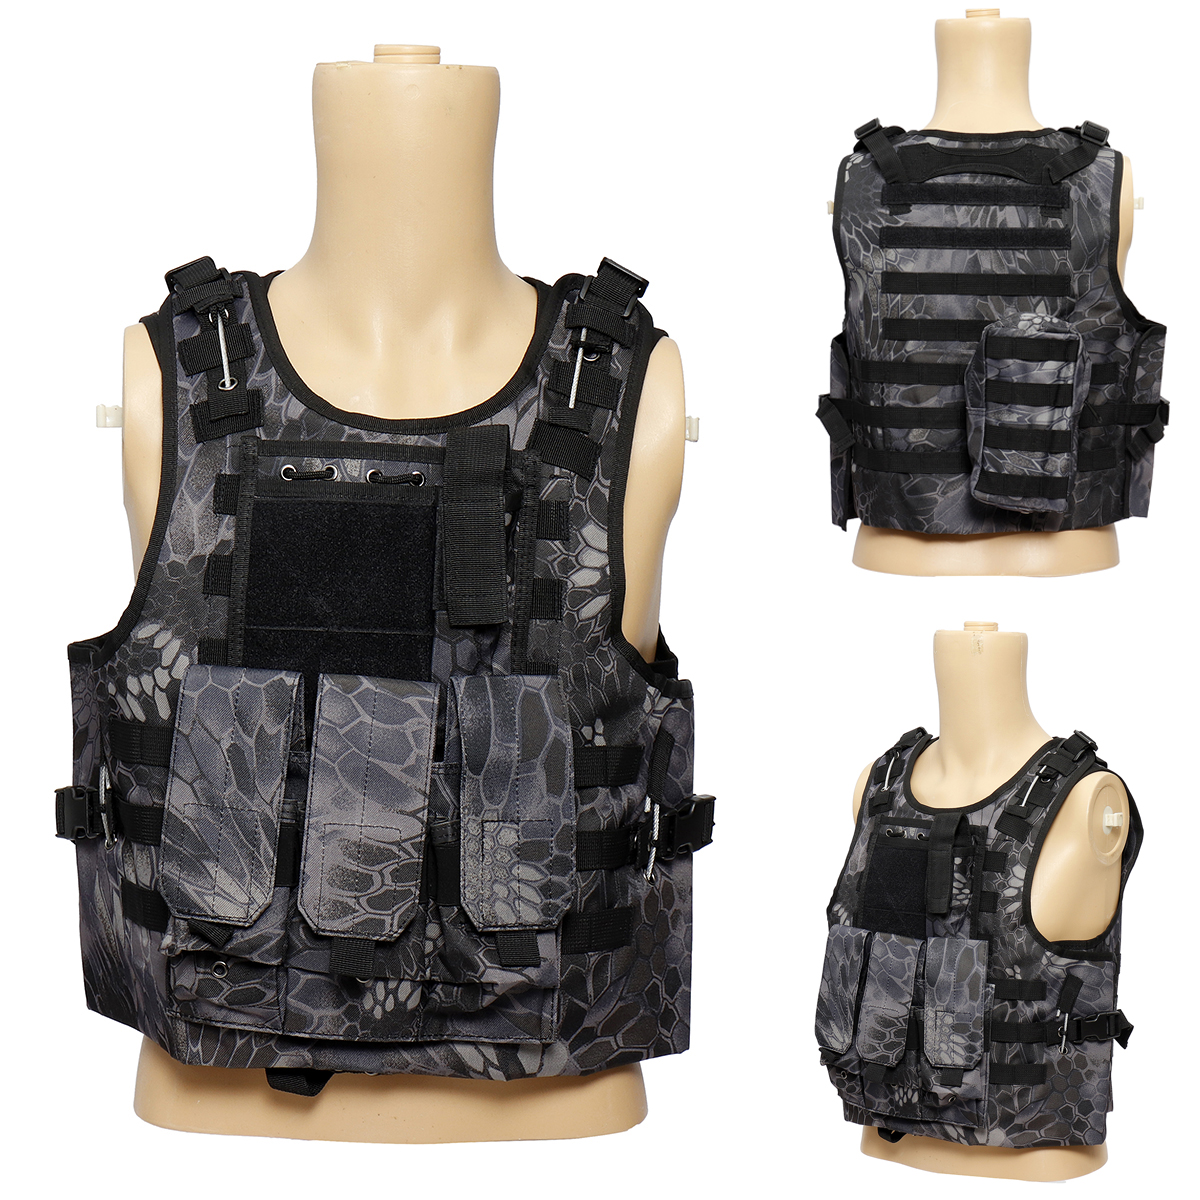 Outdoor-Tactical-Military-Vest-Sports-Hunting-Hiking-Climbing-Plate-Carrier-Paintball-Combat-Vest-1431934-8